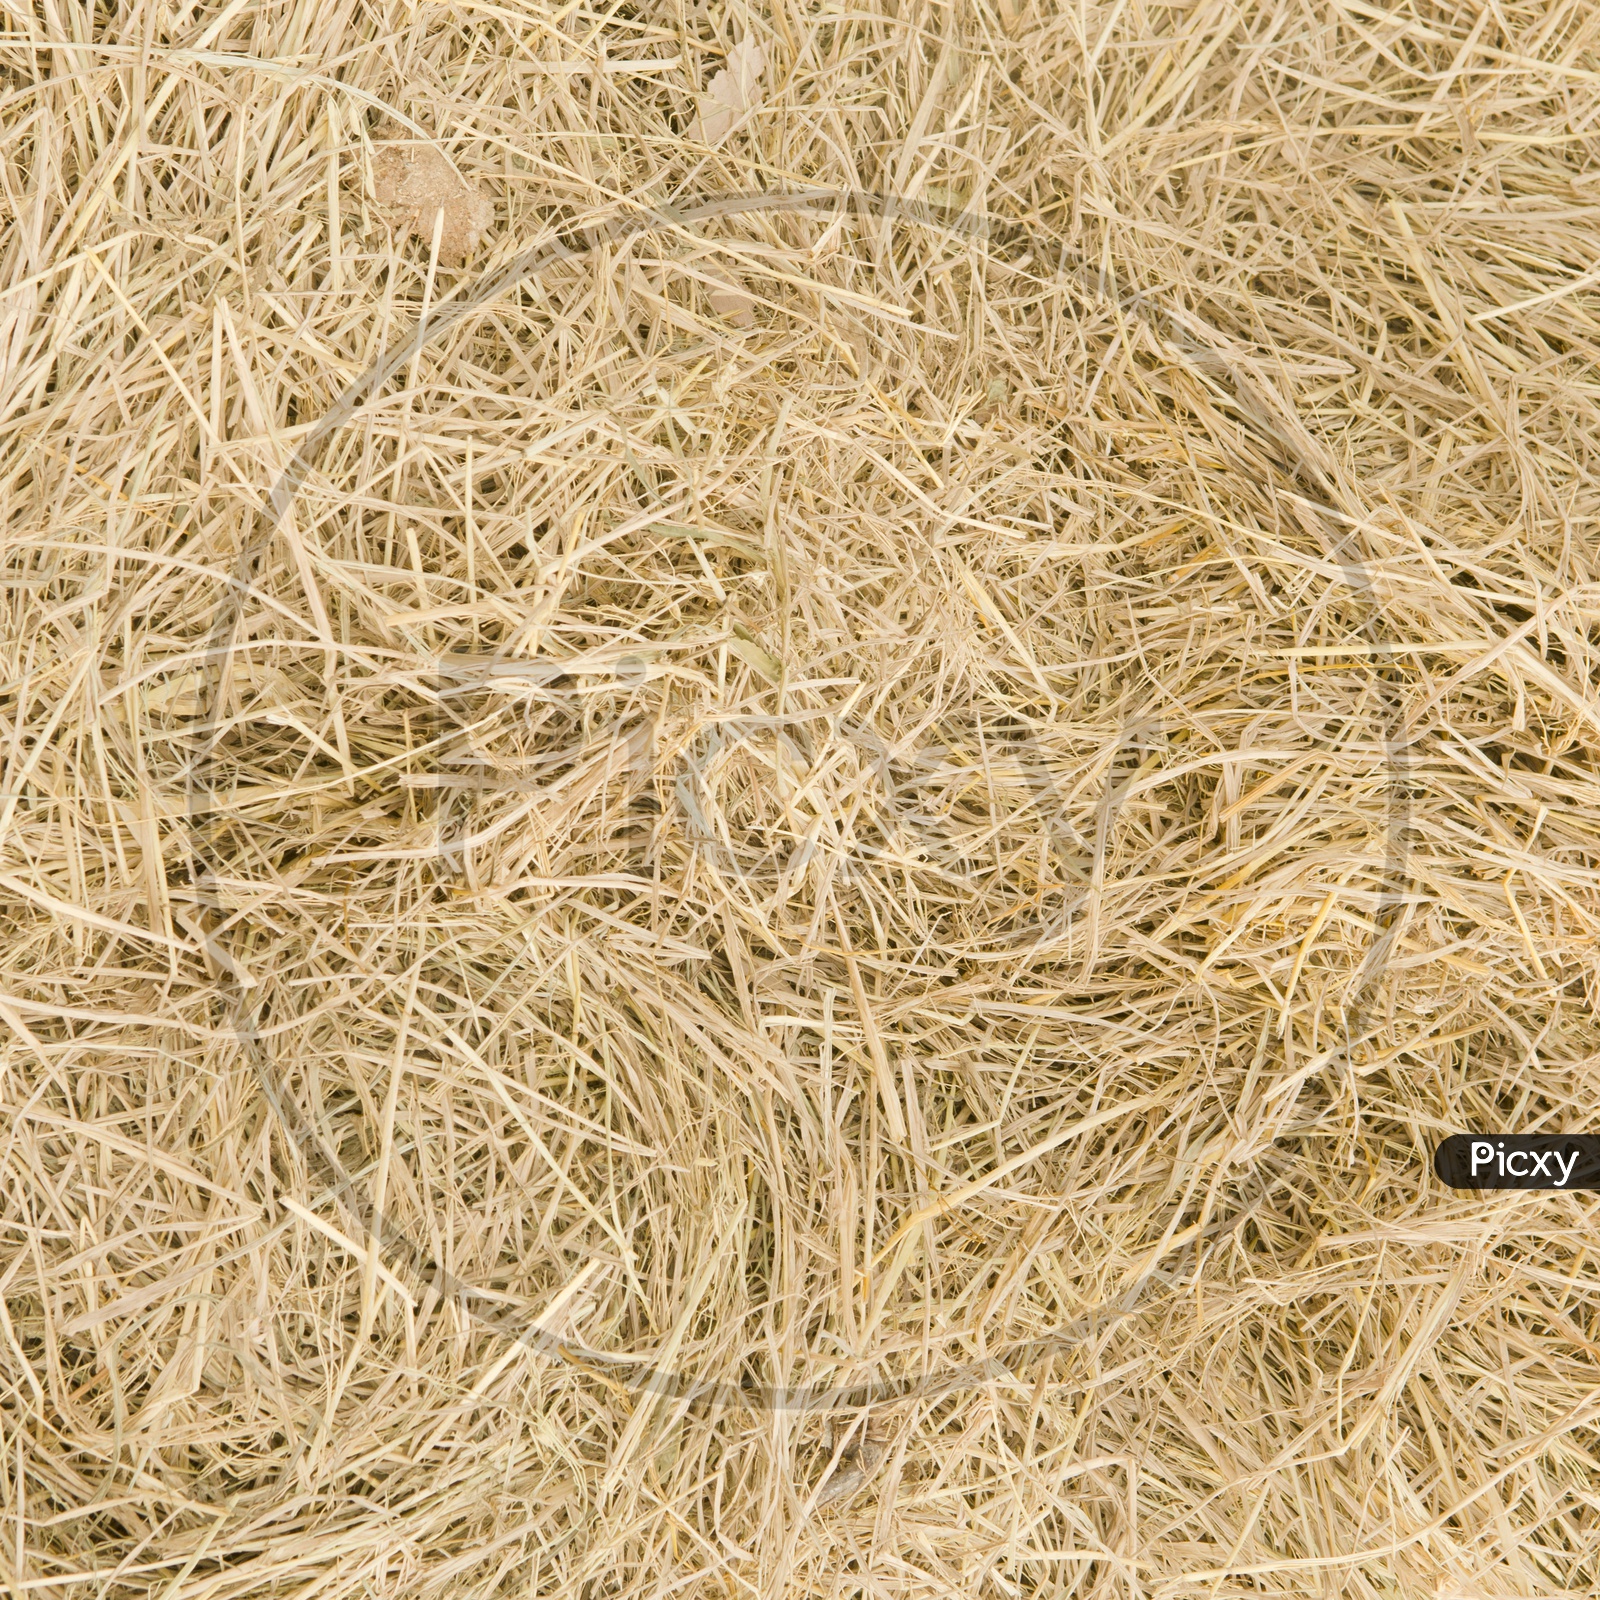 Texture Background of Straw or Dried Grass